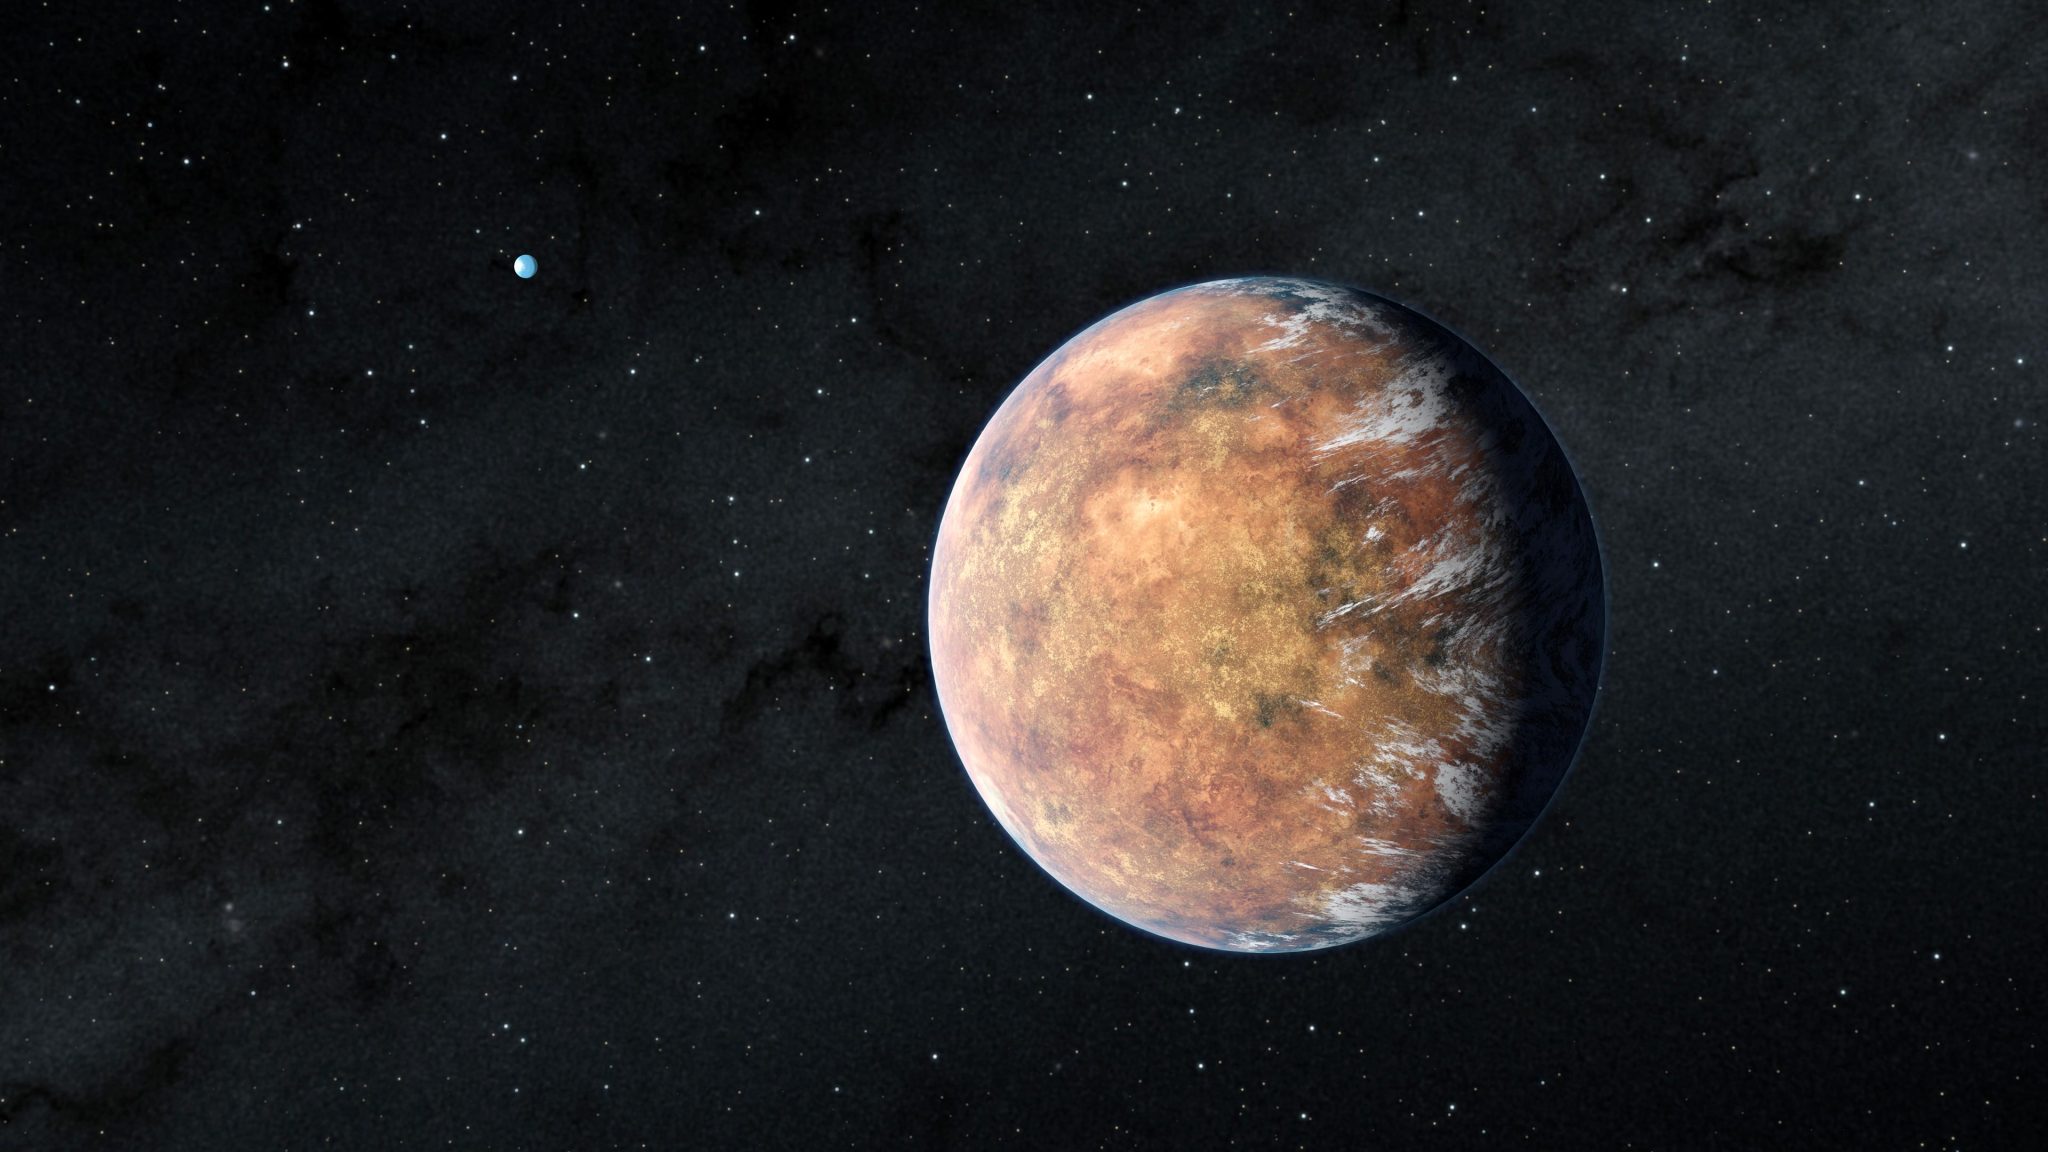 NASA Planet Hunter discovers second Earth-sized habitable world in TOI 700 system